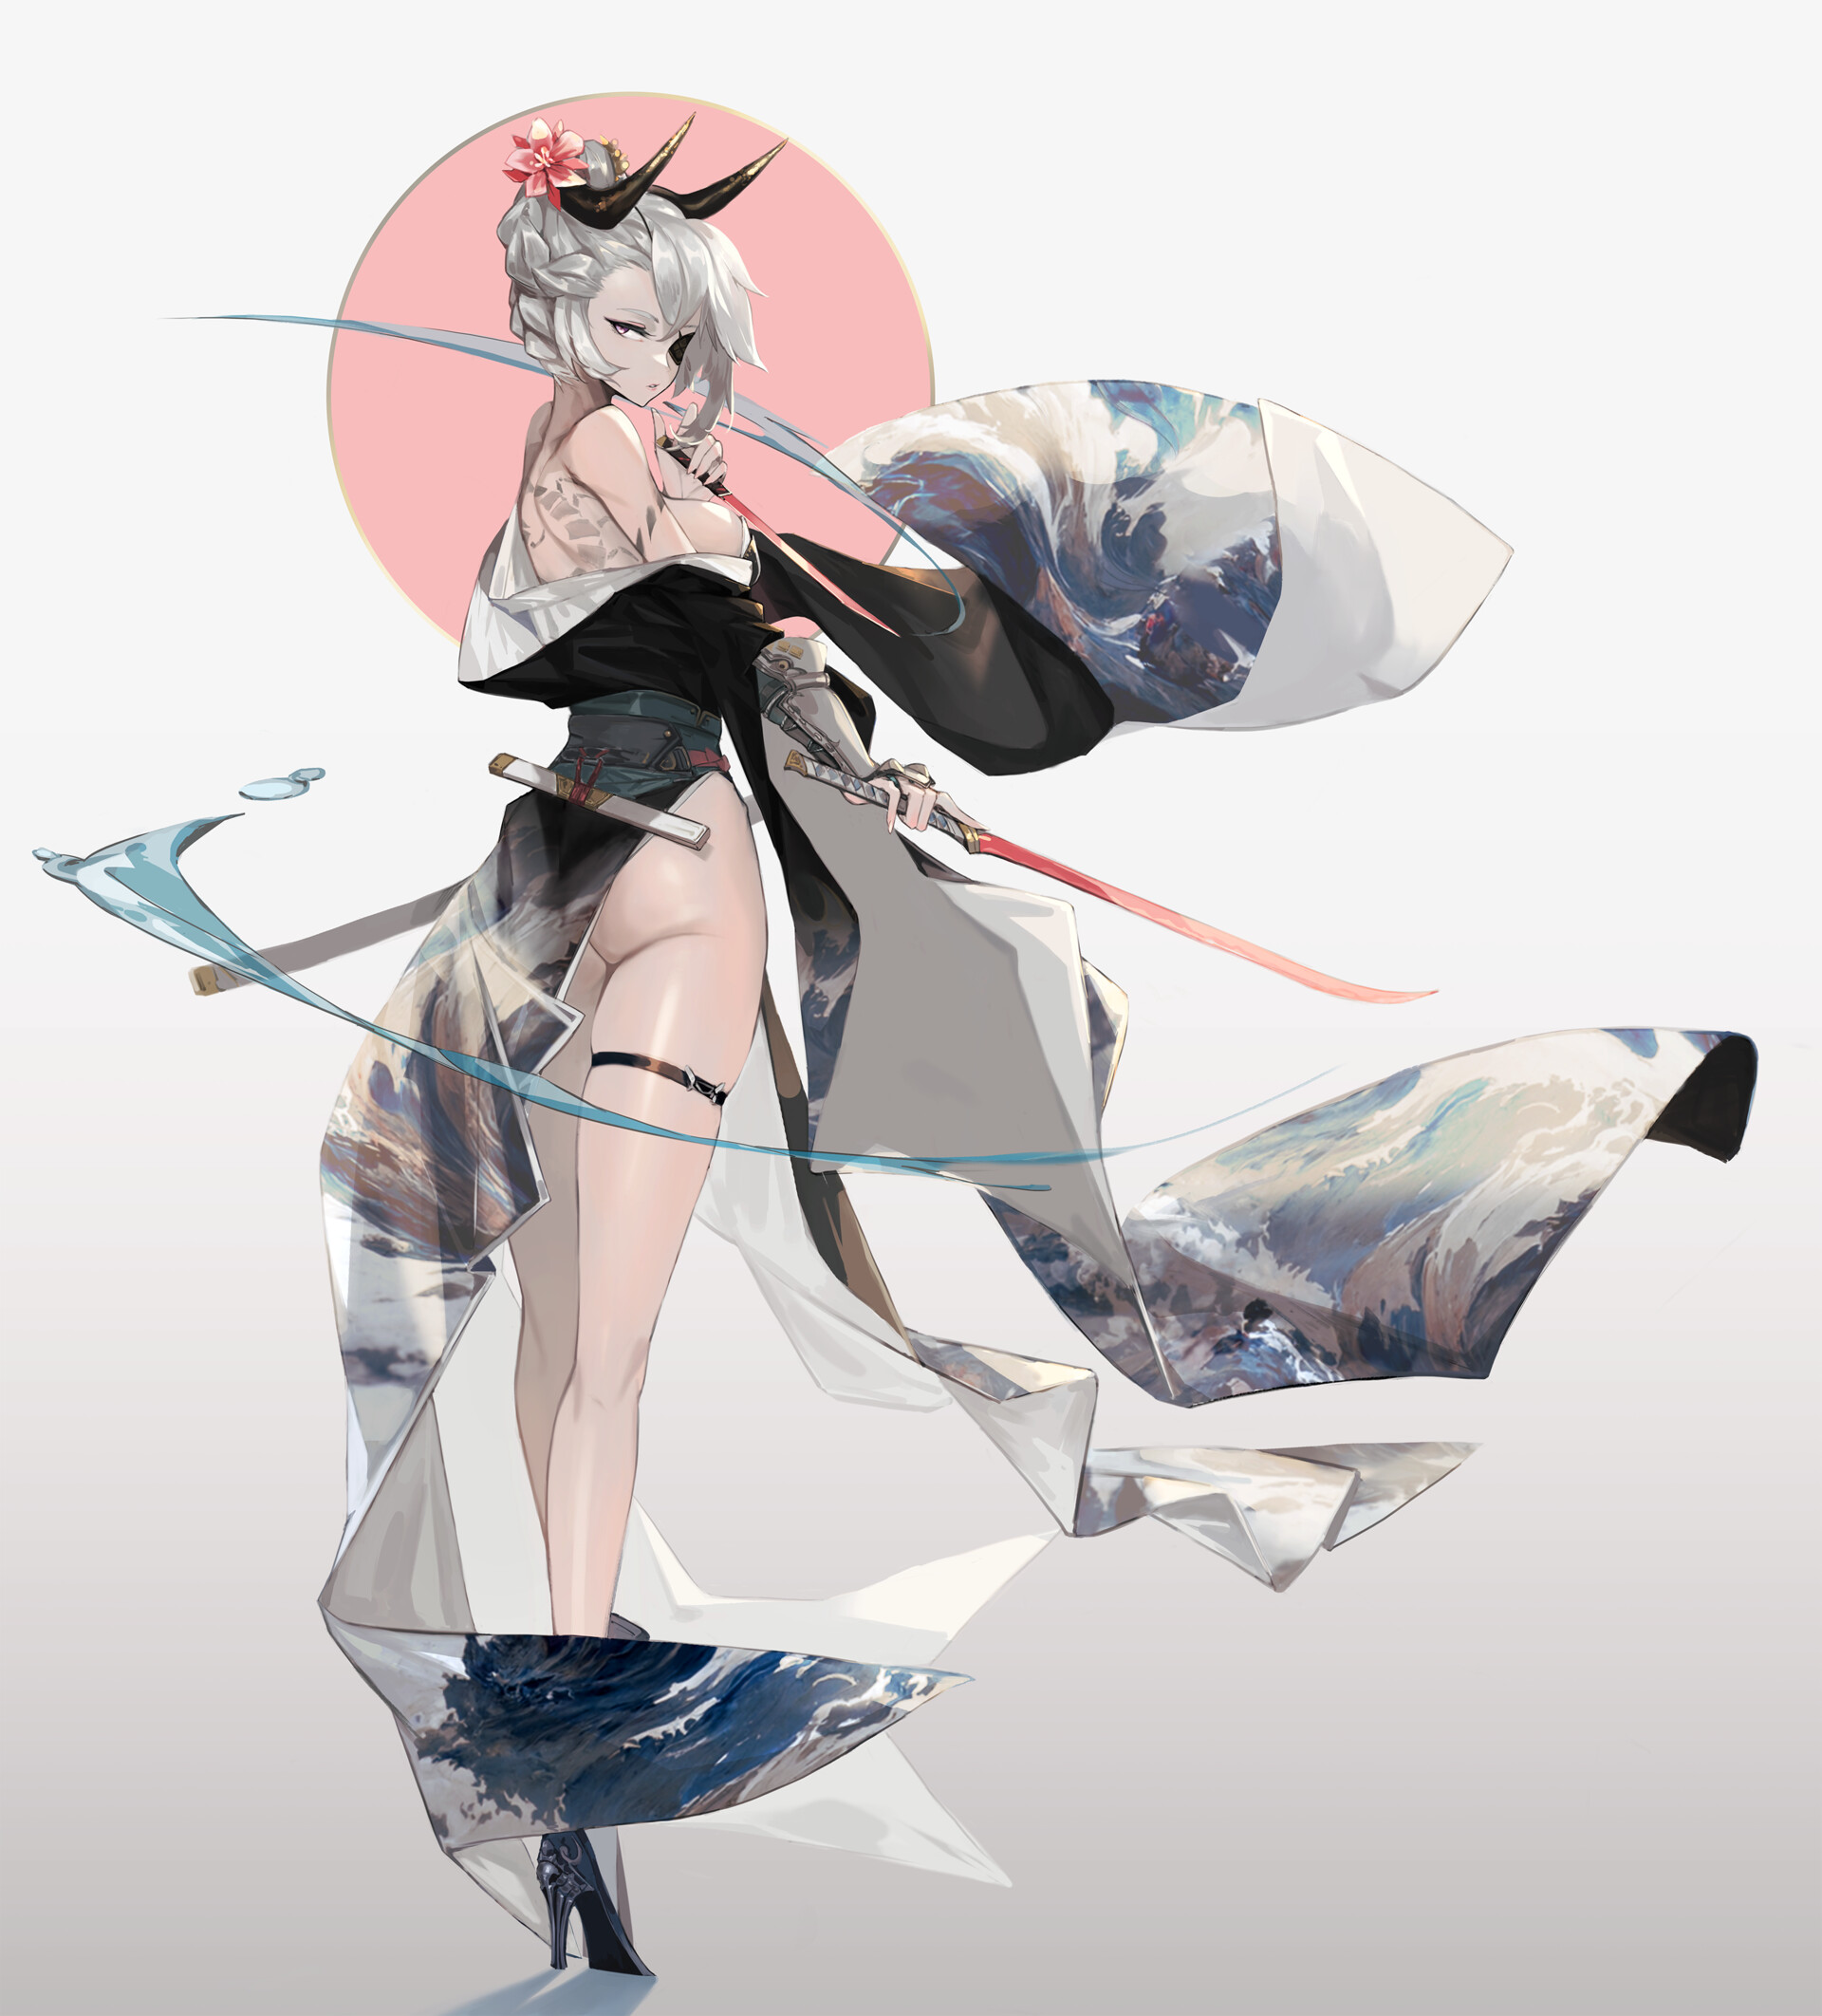 Anime 1920x2124 Bamuth Chen drawing women silver hair hair accessories flower in hair dress ass thigh strap weapon circle pink anime anime girls sword women with swords girls with guns legs heels white background horns fantasy art fantasy girl black clothing inked girls tattoo eyepatches slim body